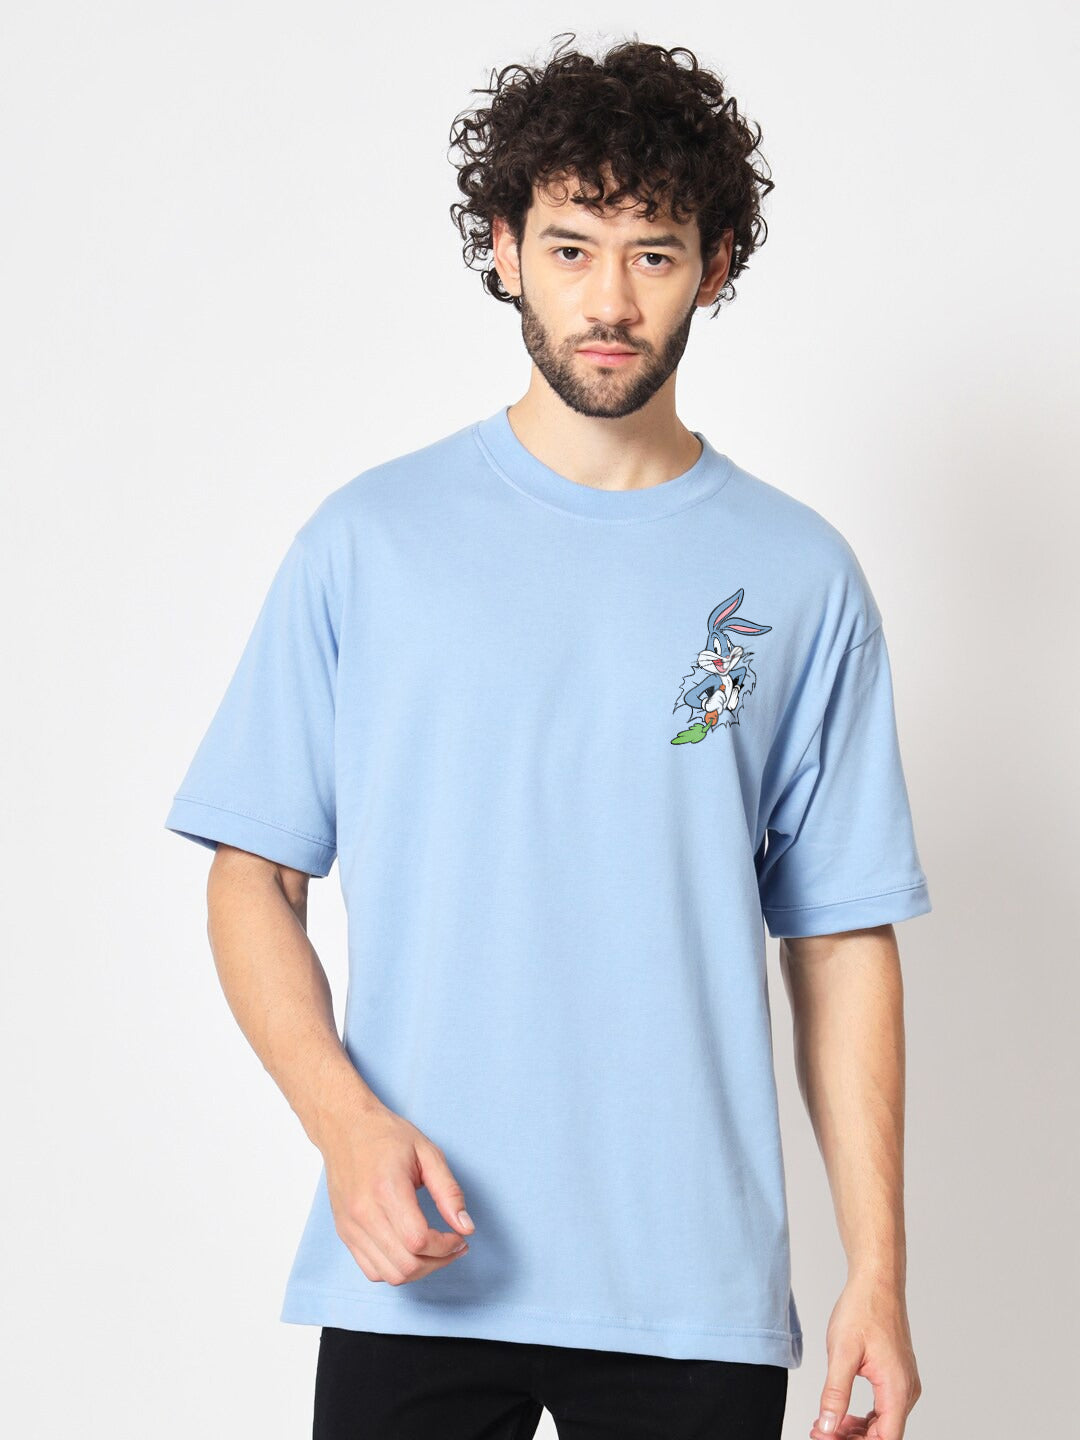 Whats Up Doc Bugs Bunny Oversized T-Shirt